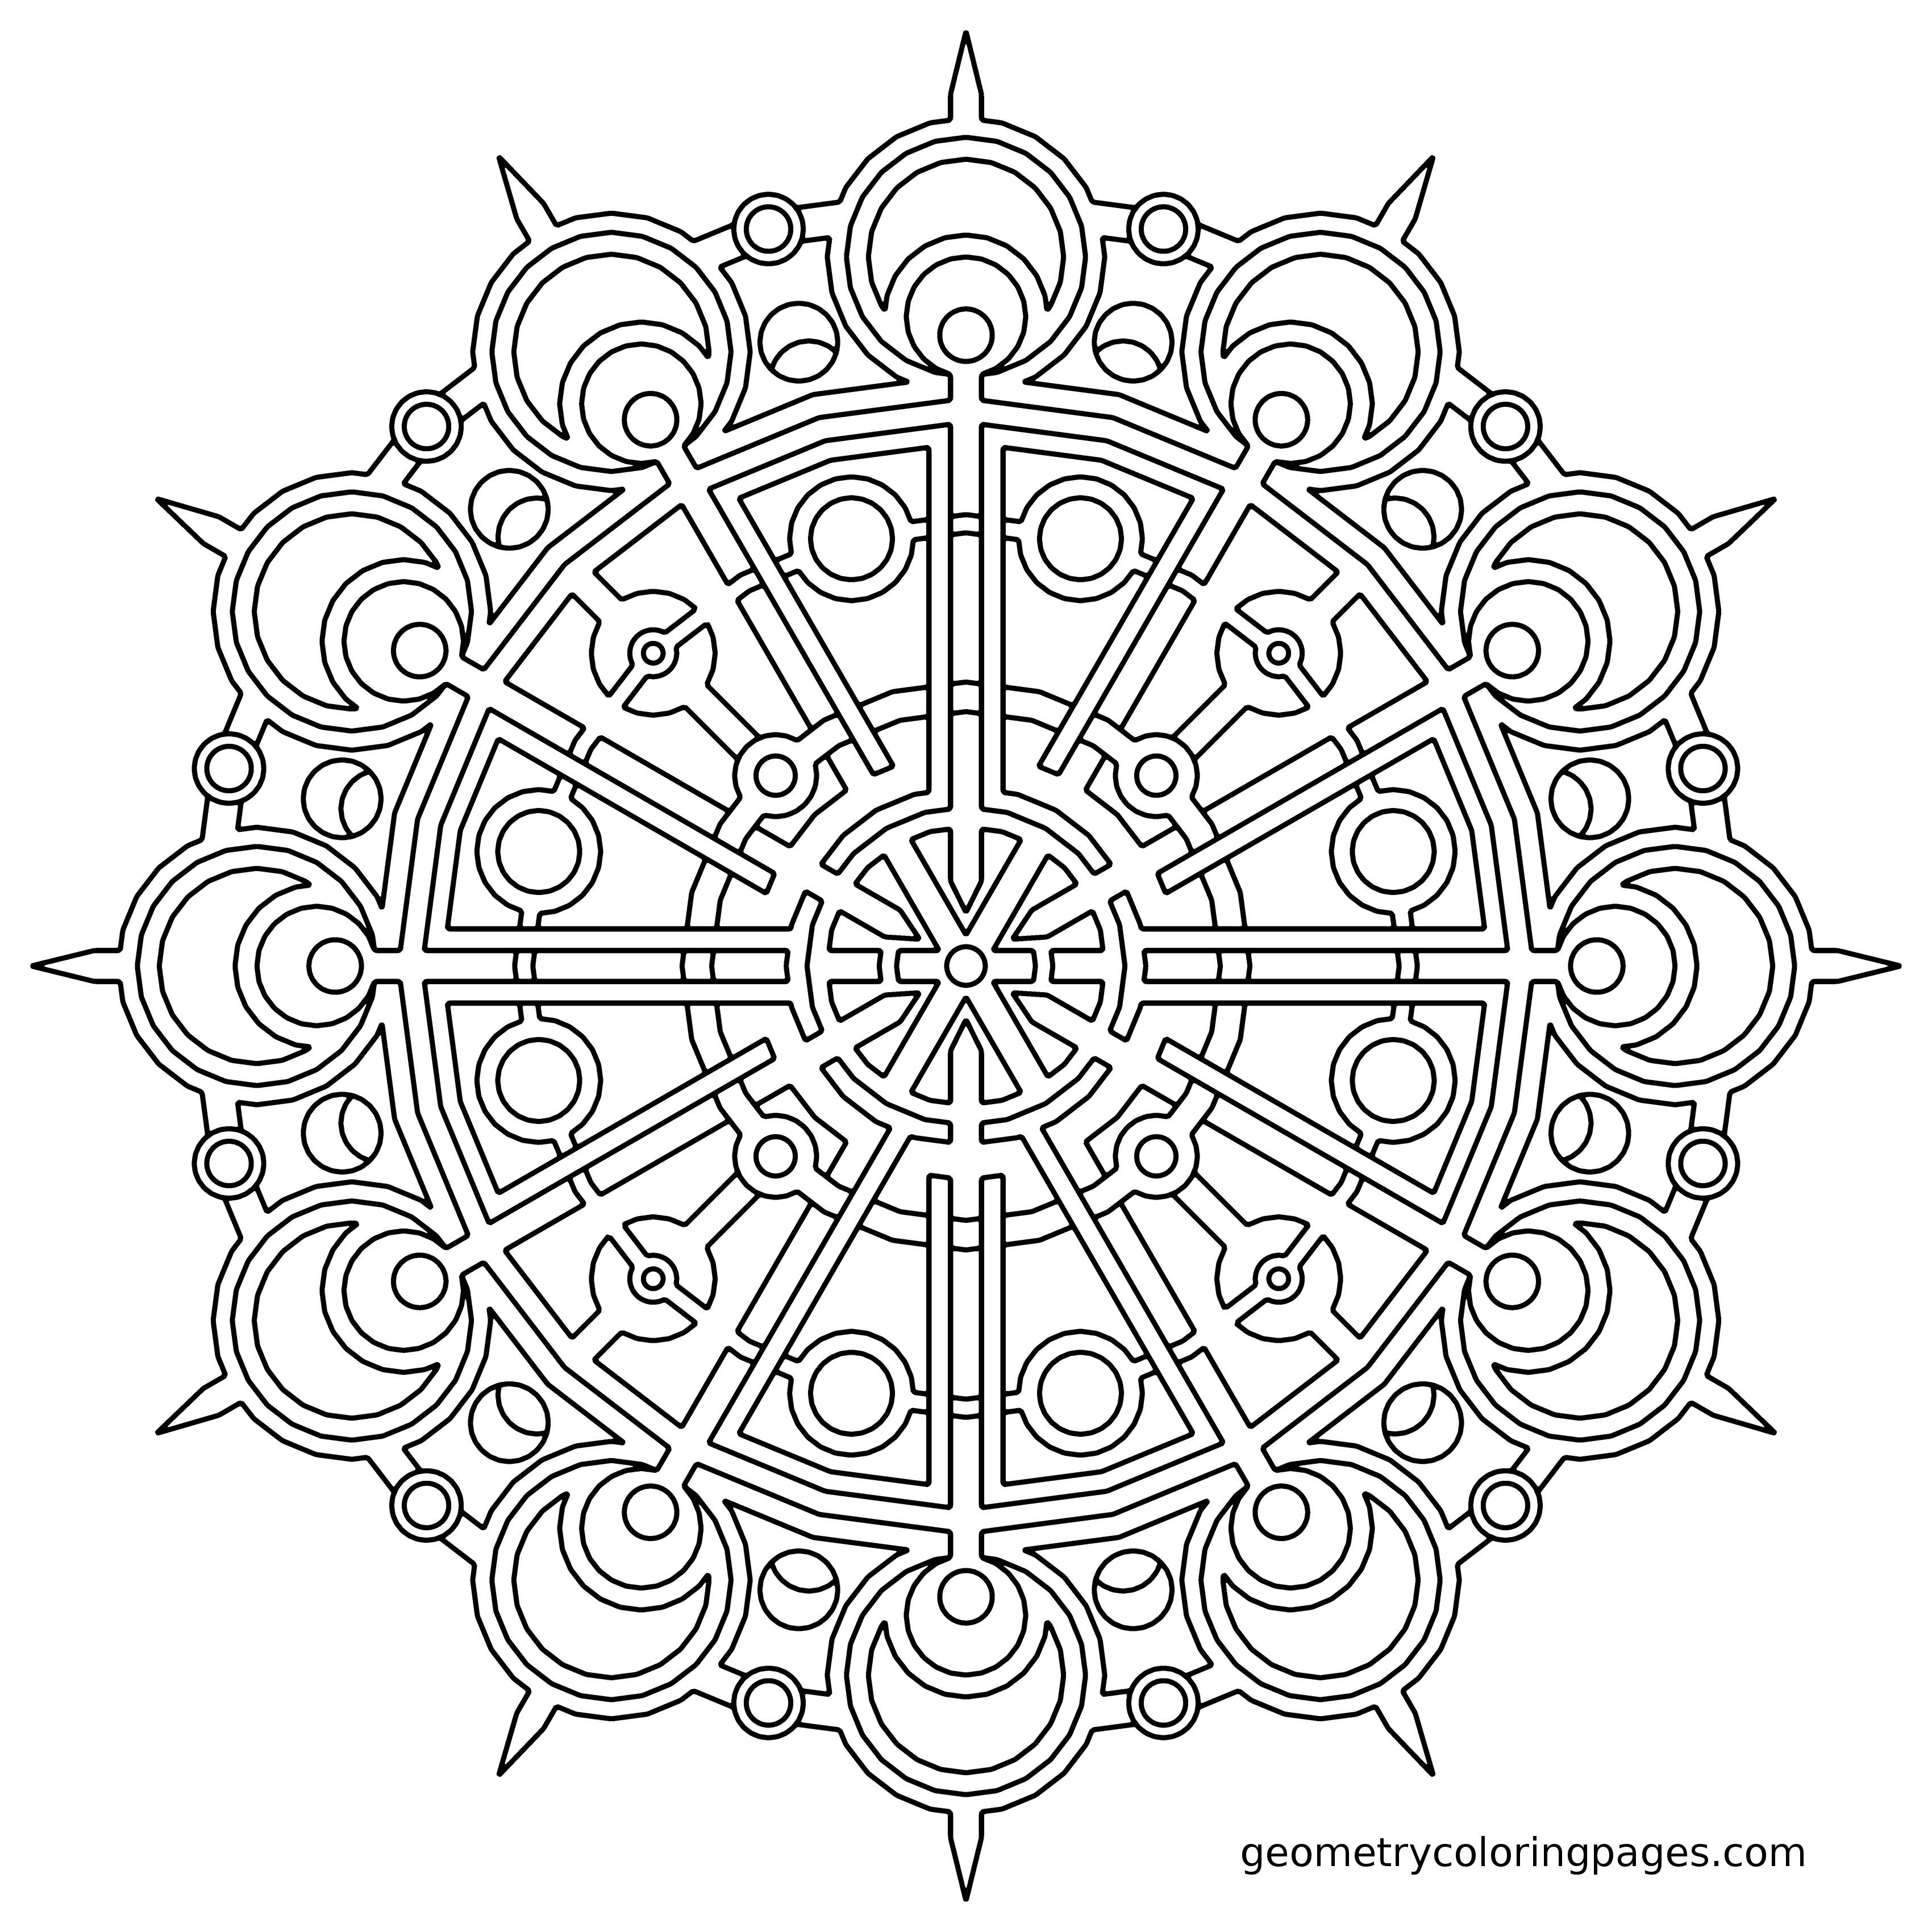 Mandela Coloring Pages
 Geometric Mandala Coloring Pages Coloring Home